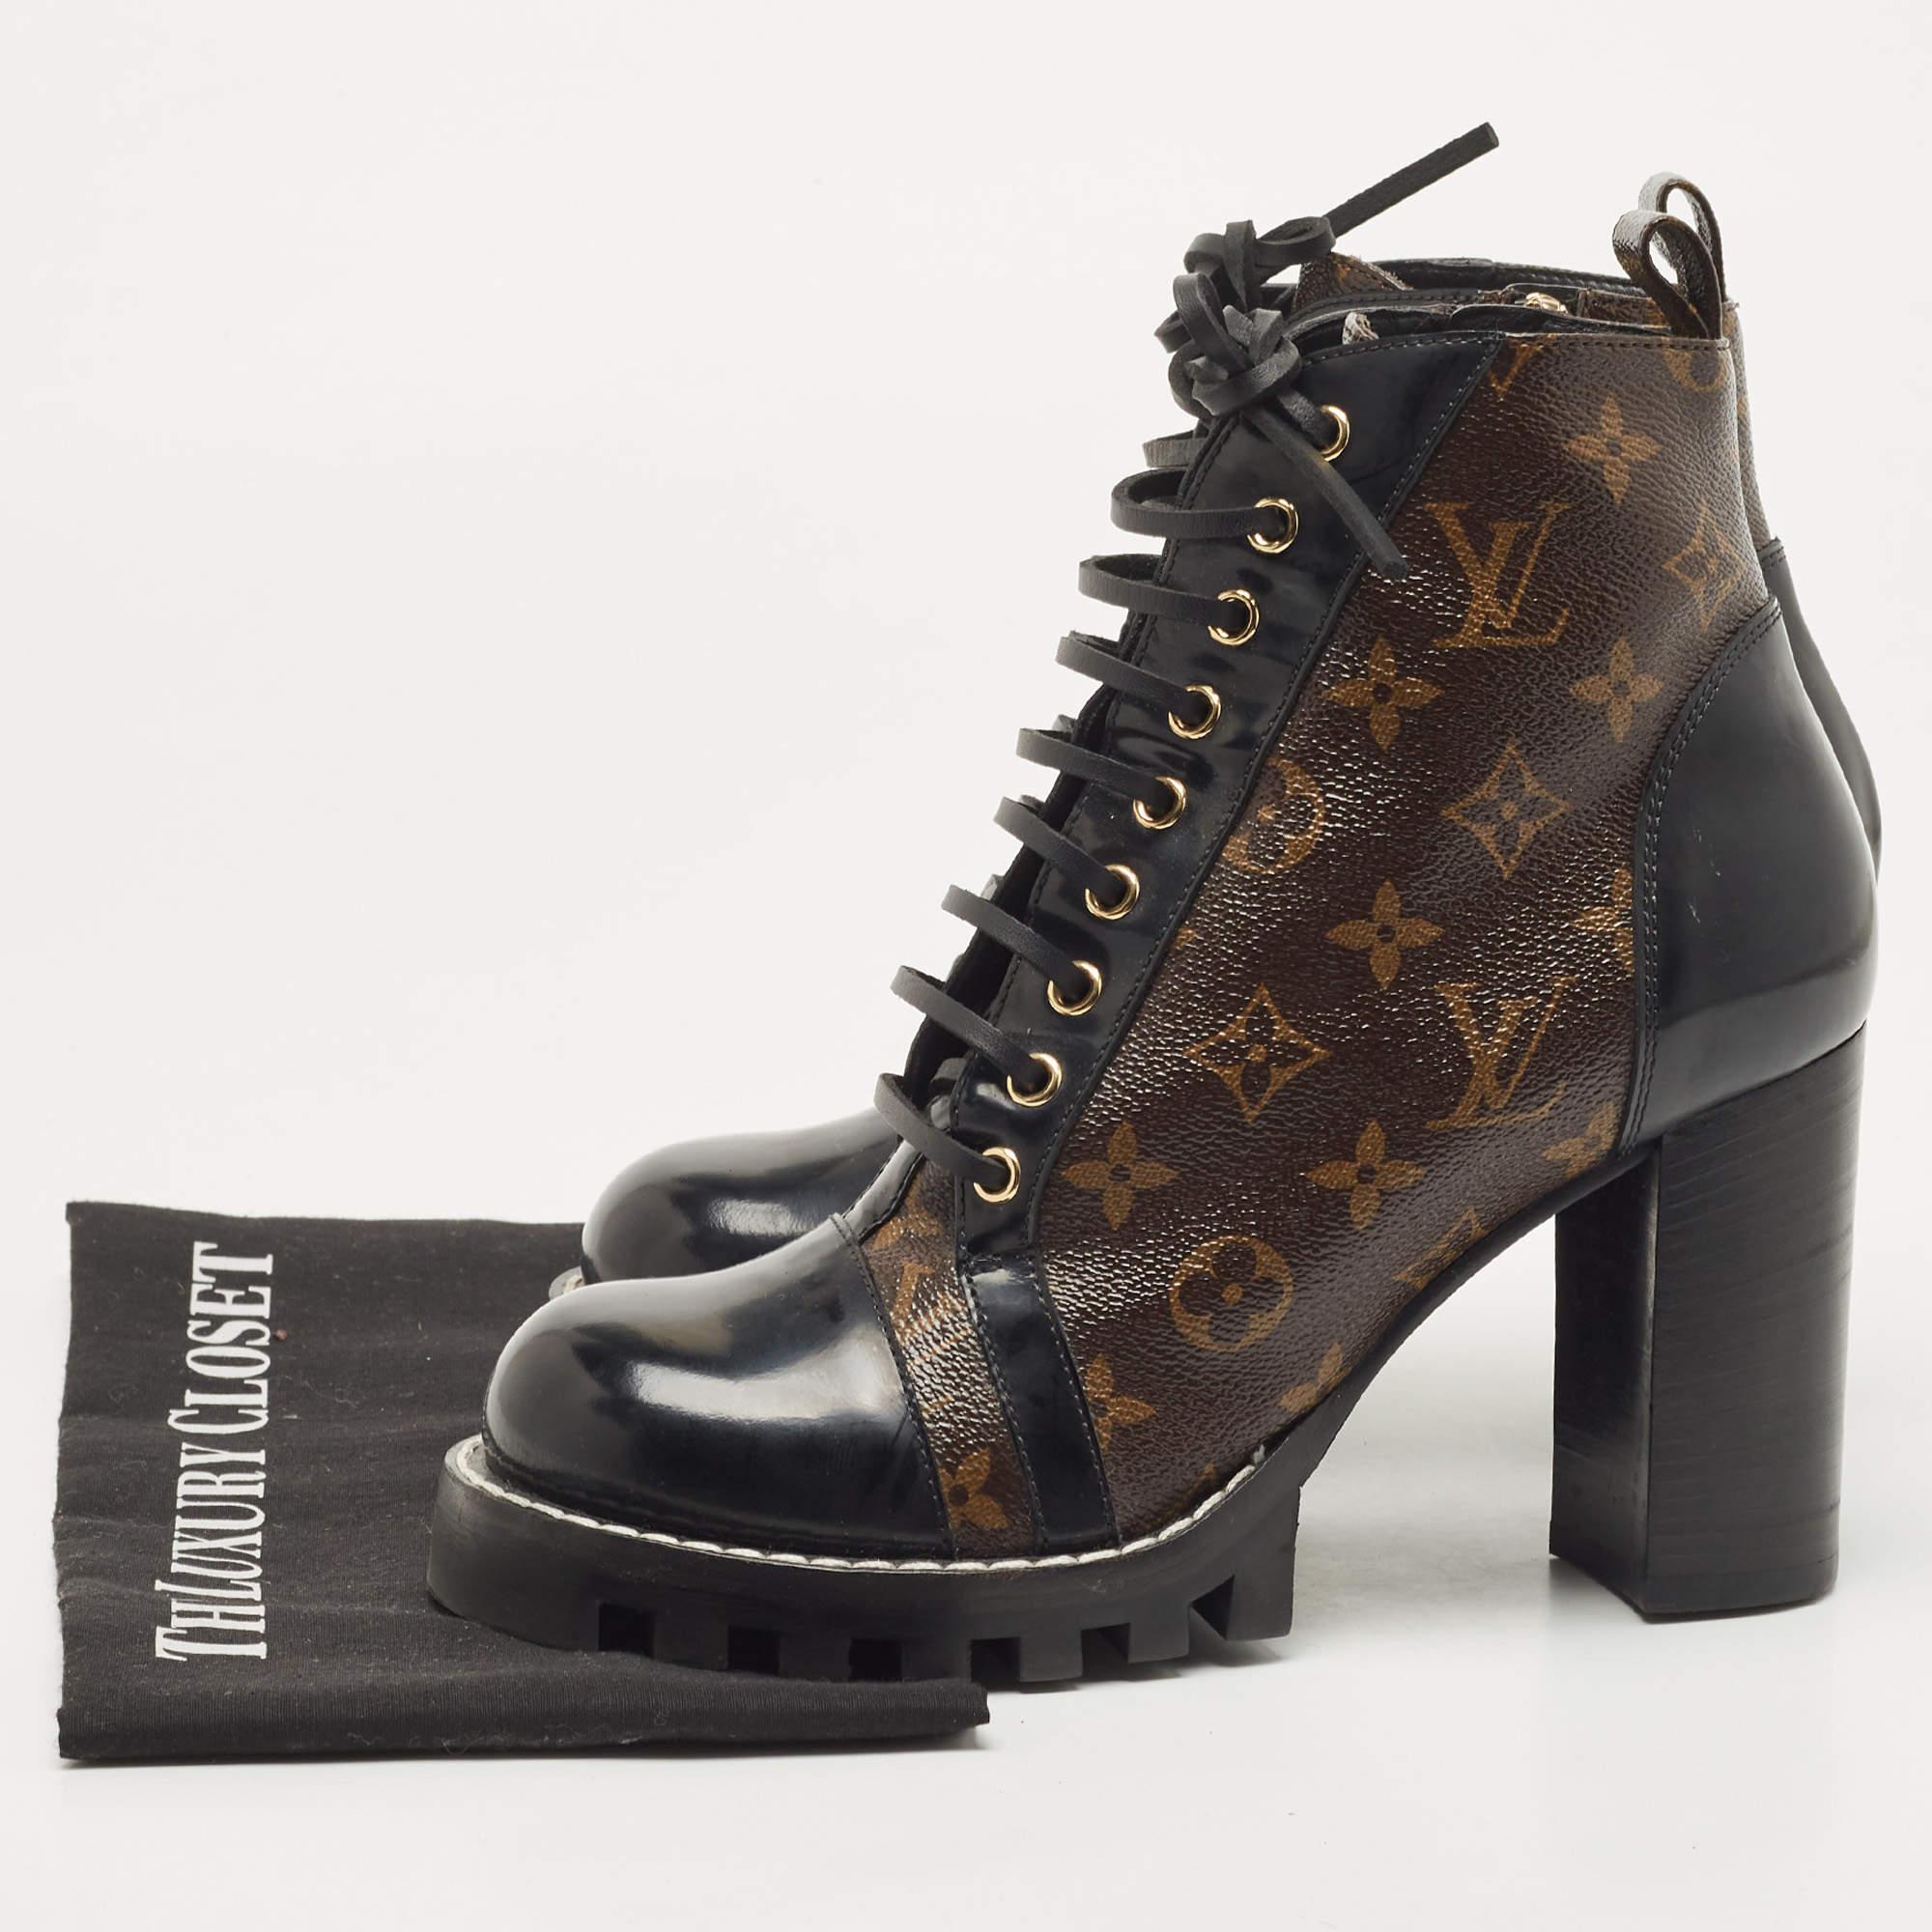 Louis Vuitton Black/Brown Leather and Monogram Boots Size 40 5